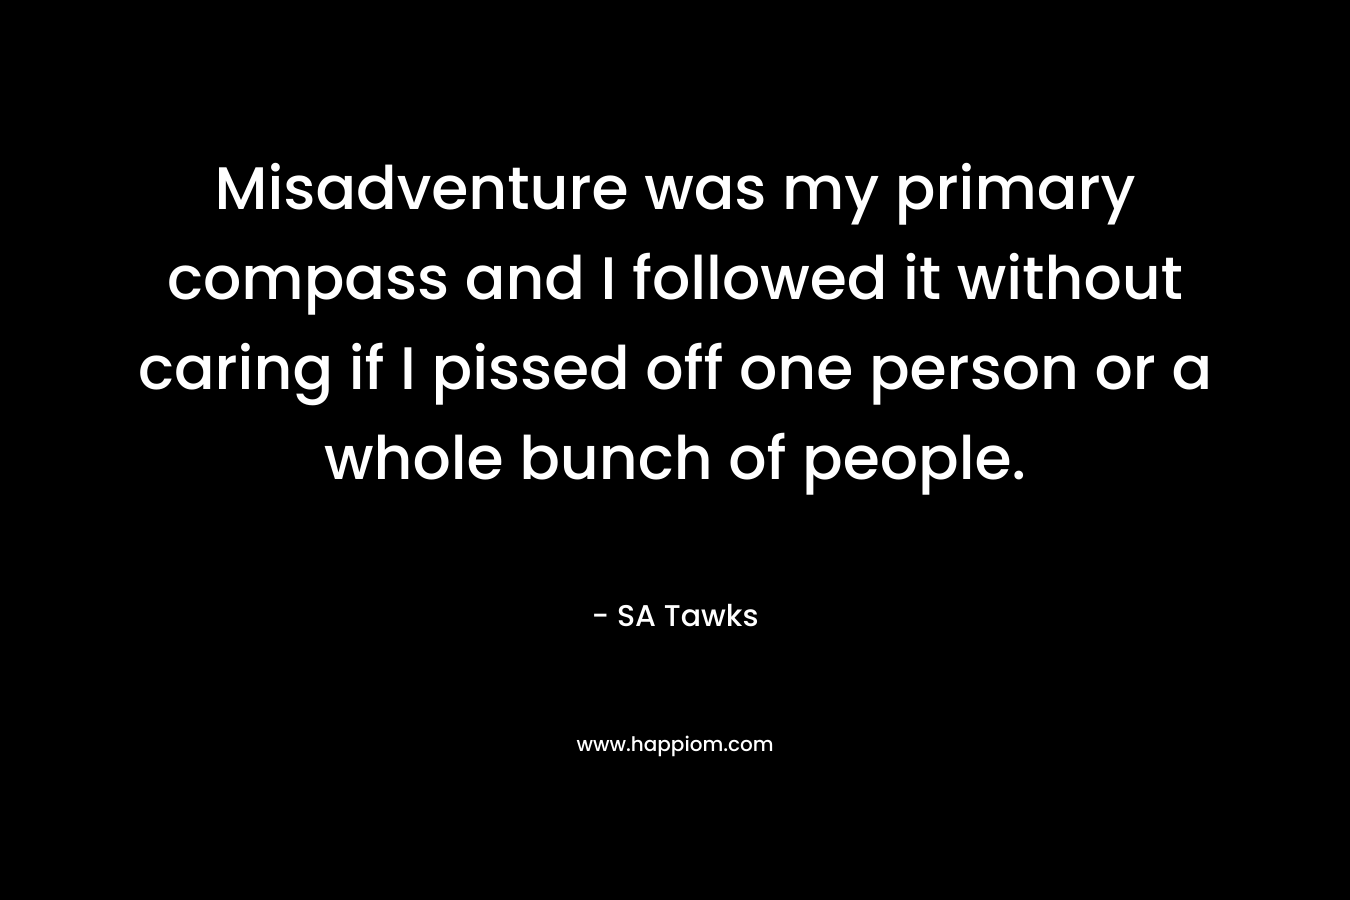 Misadventure was my primary compass and I followed it without caring if I pissed off one person or a whole bunch of people.